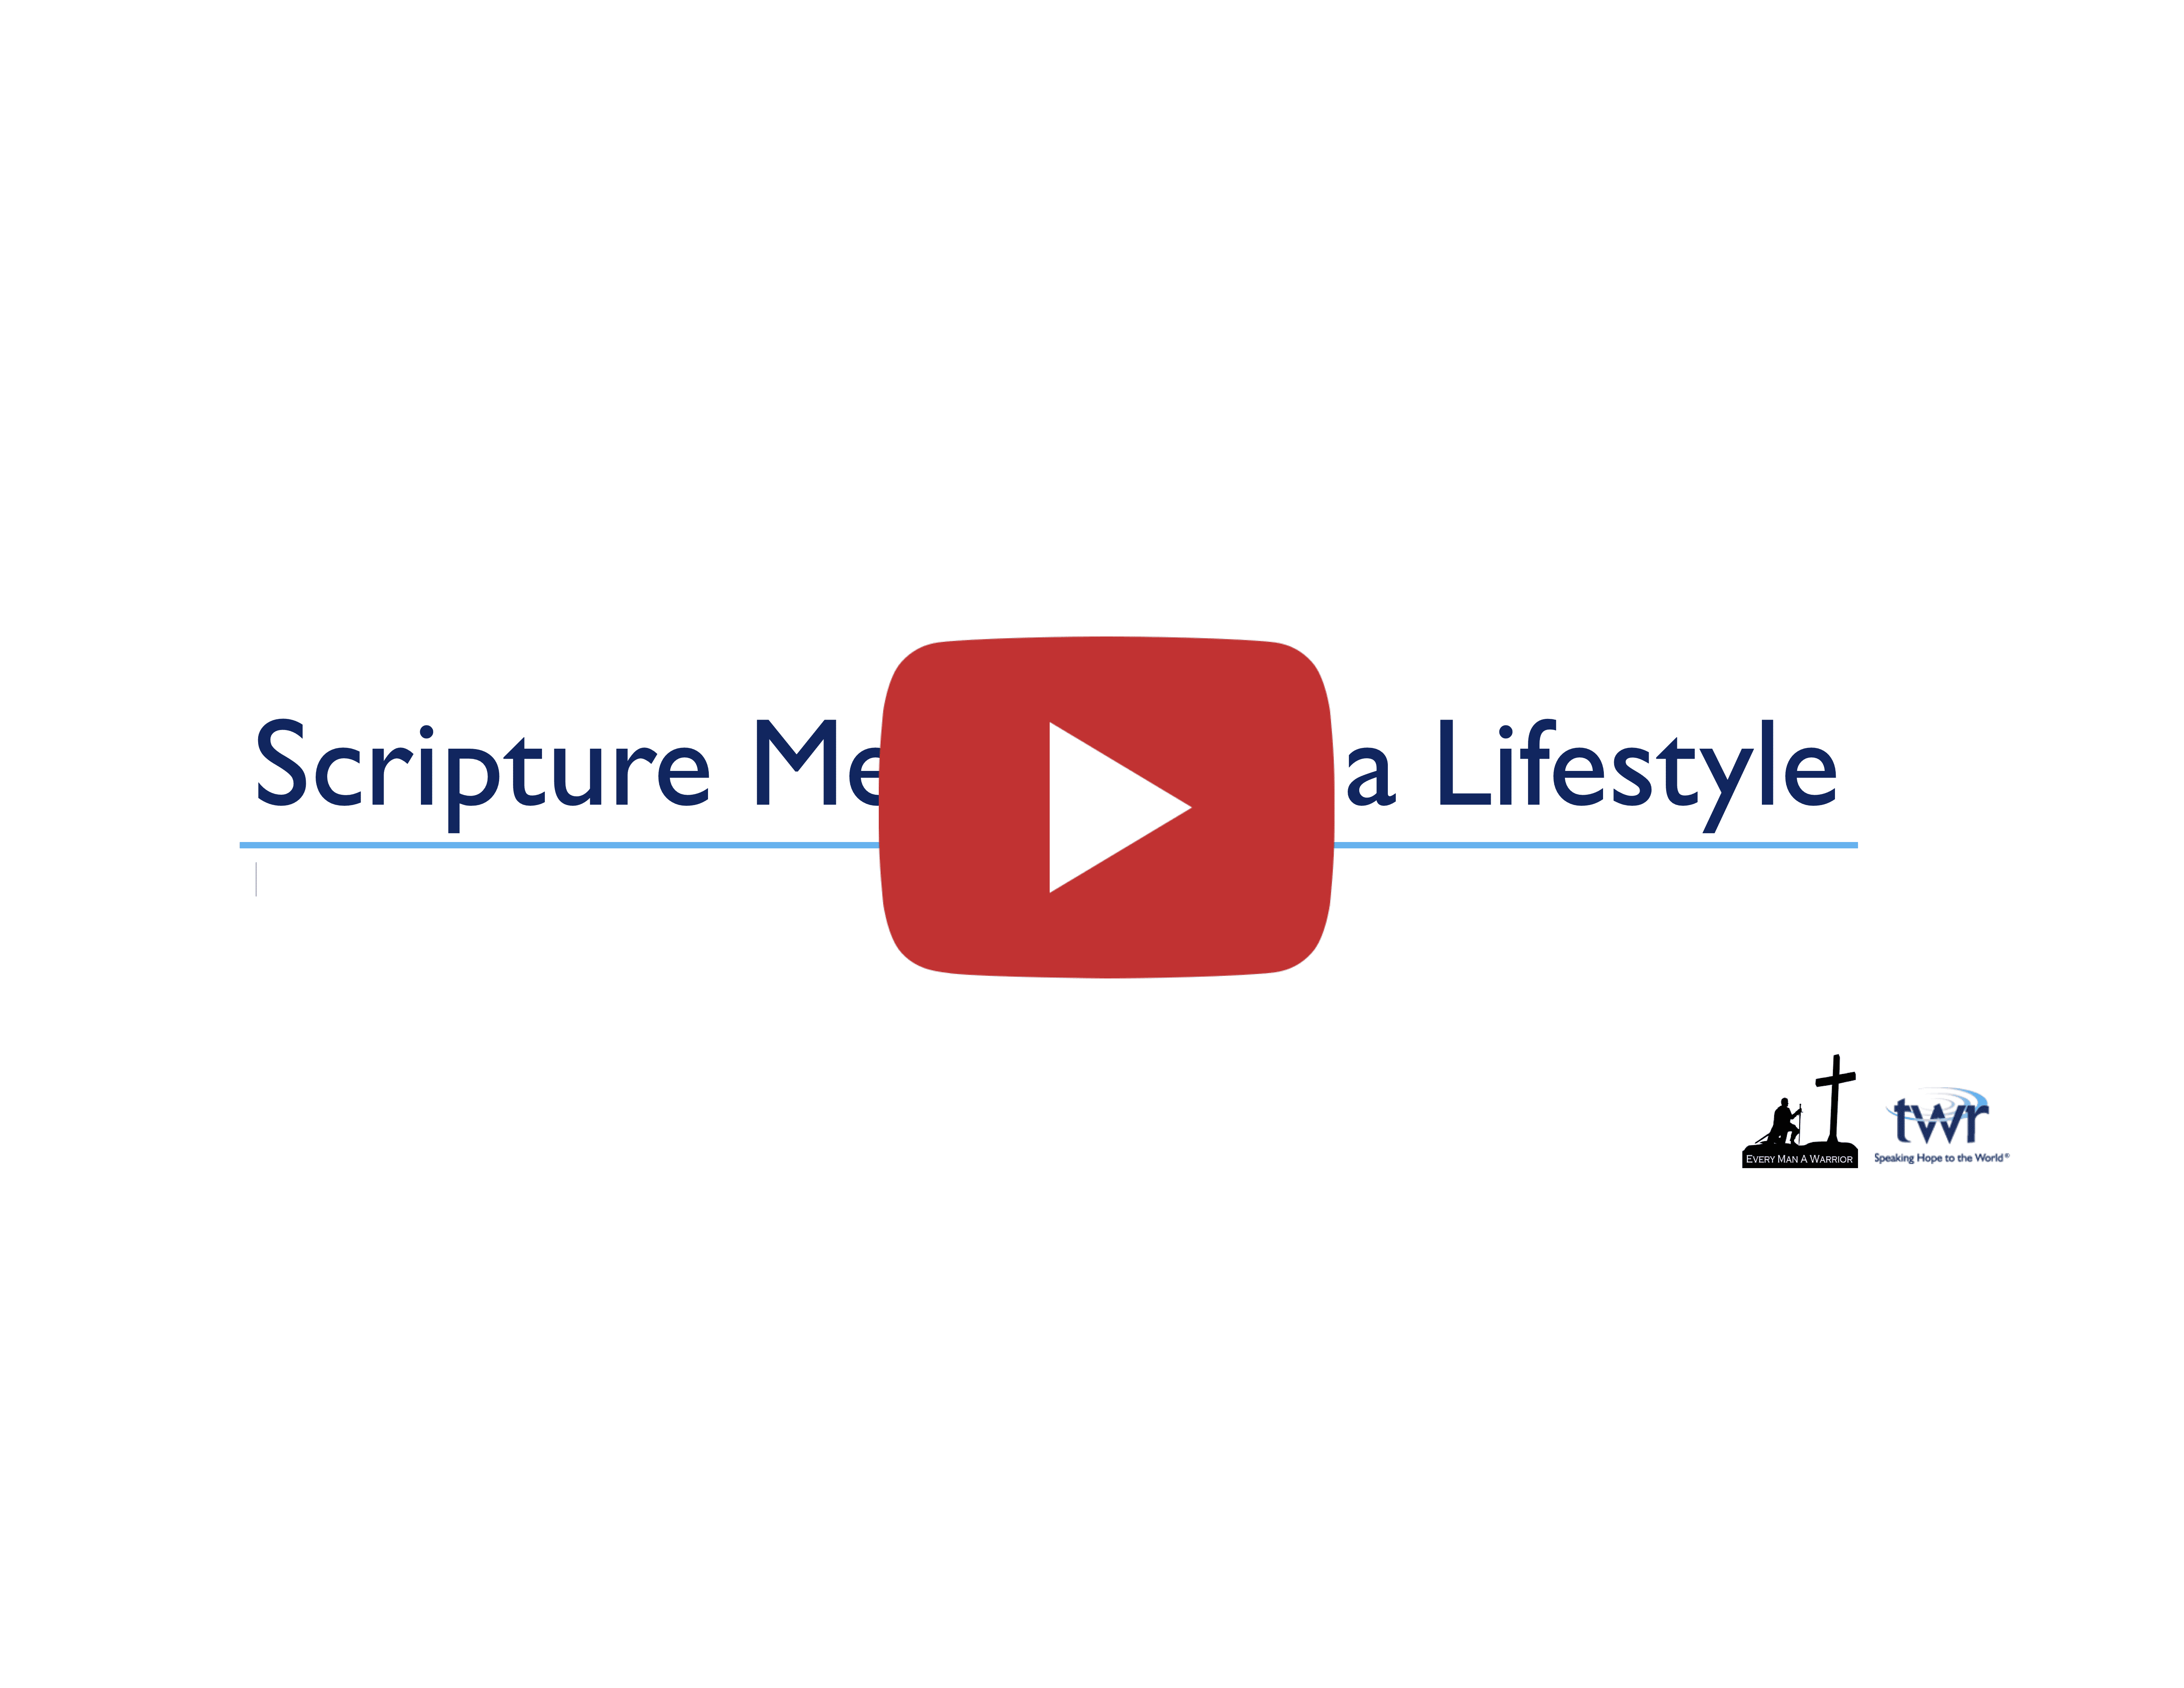 Scripture Memory as a Lifestyle